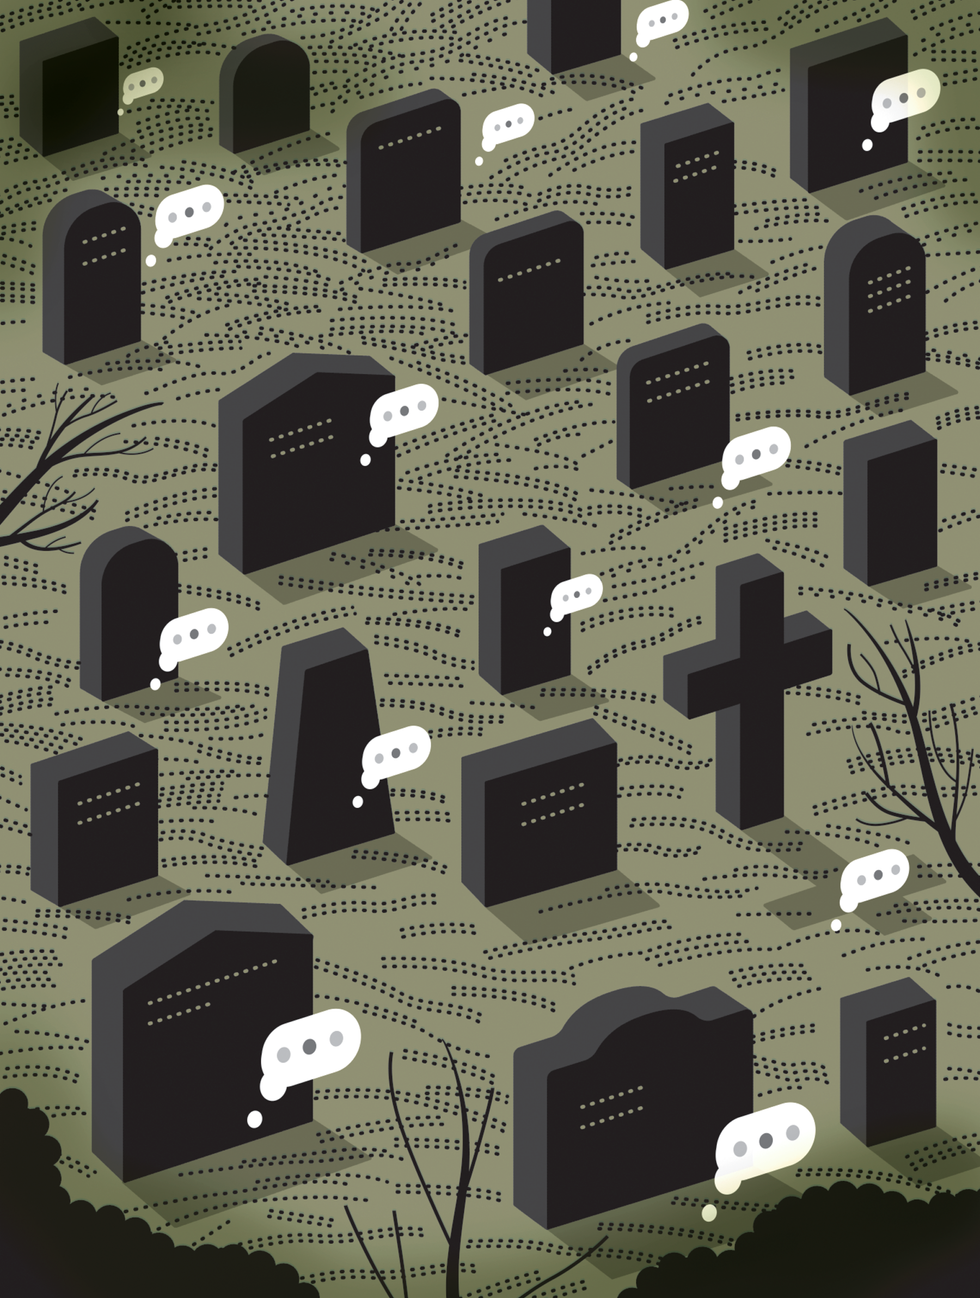 An illustration of tombstones with pending chat bubbles on some of them.